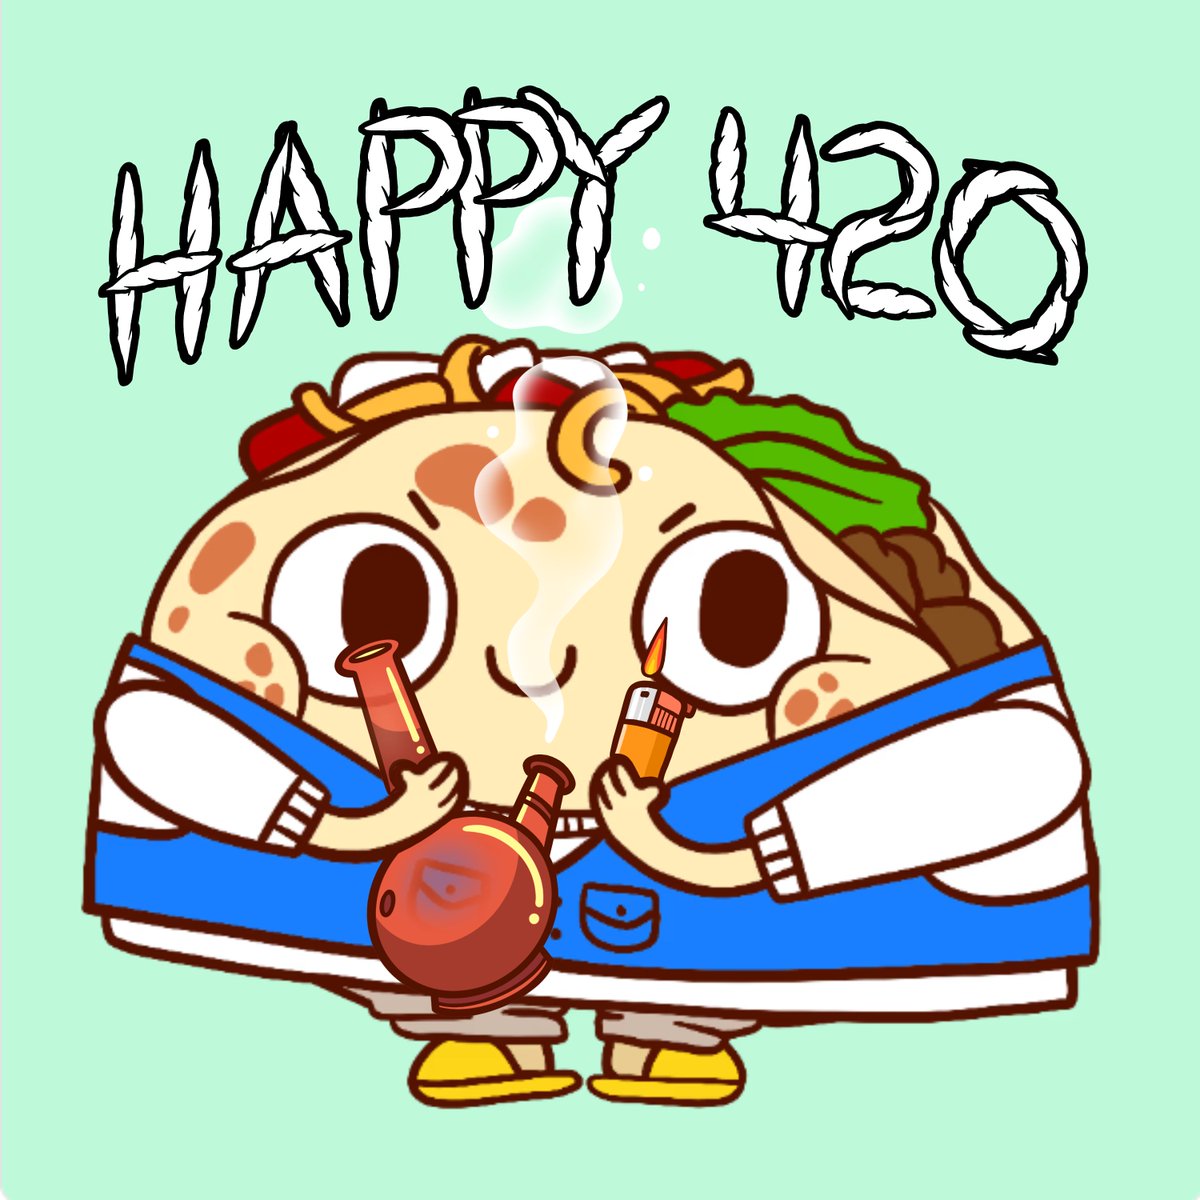 Happy 420 day!

#420day #TacoTribe